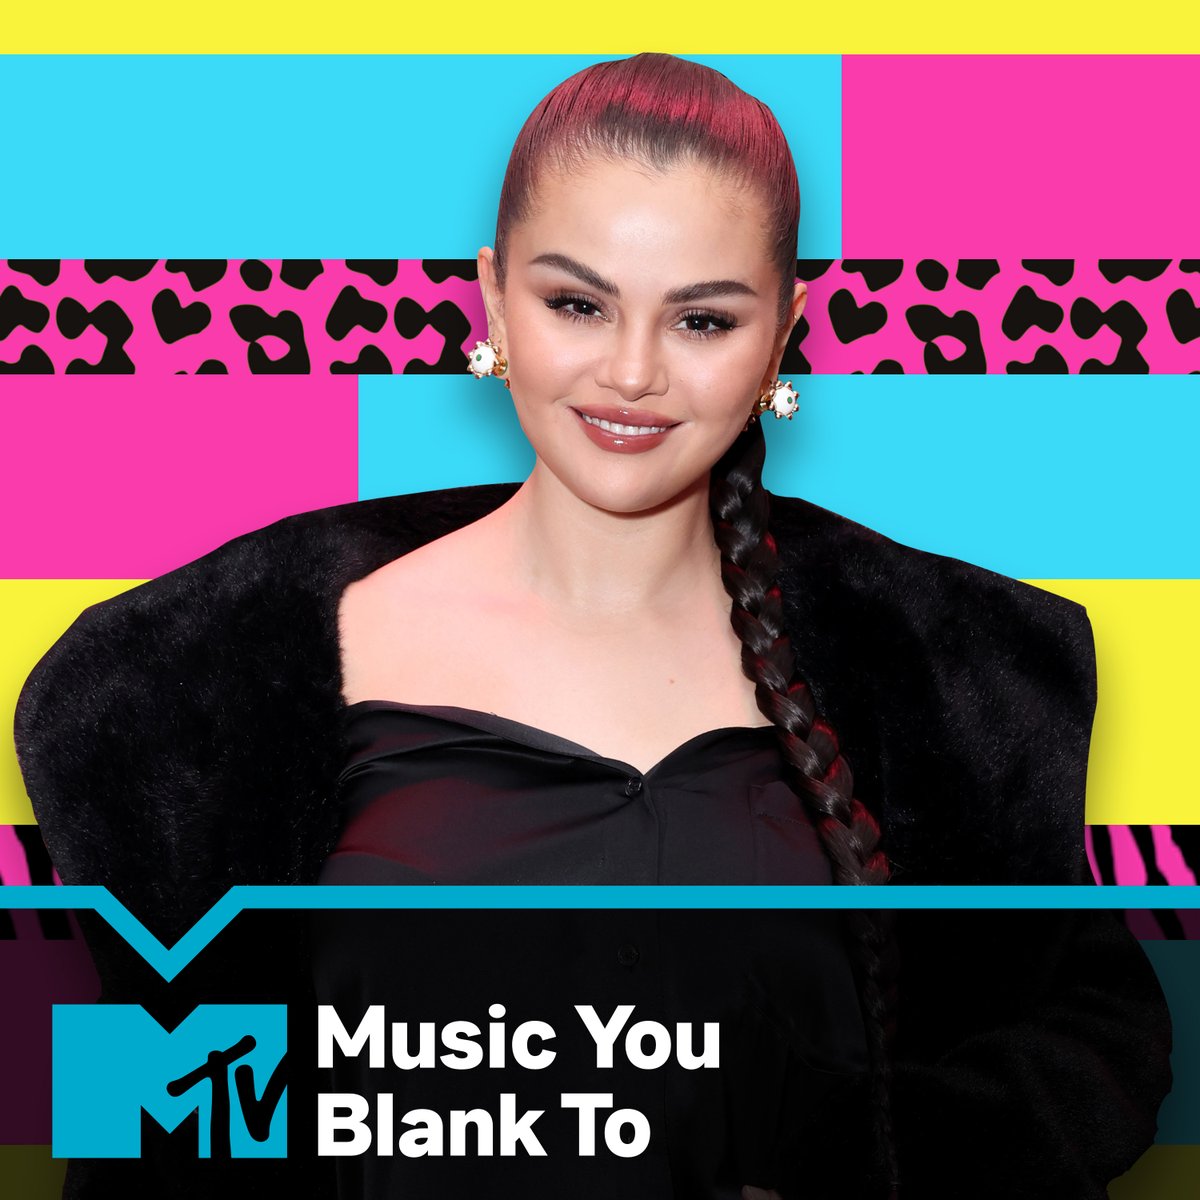 For #MentalHealthAction day, here's the #MusicYouBlankTo playlist your submissions helped create!

Filled with music for your mind by @selenagomez, @lizzo, @sushitrash and more. Listen via @Spotify: spoti.fi/3h0s8Ps